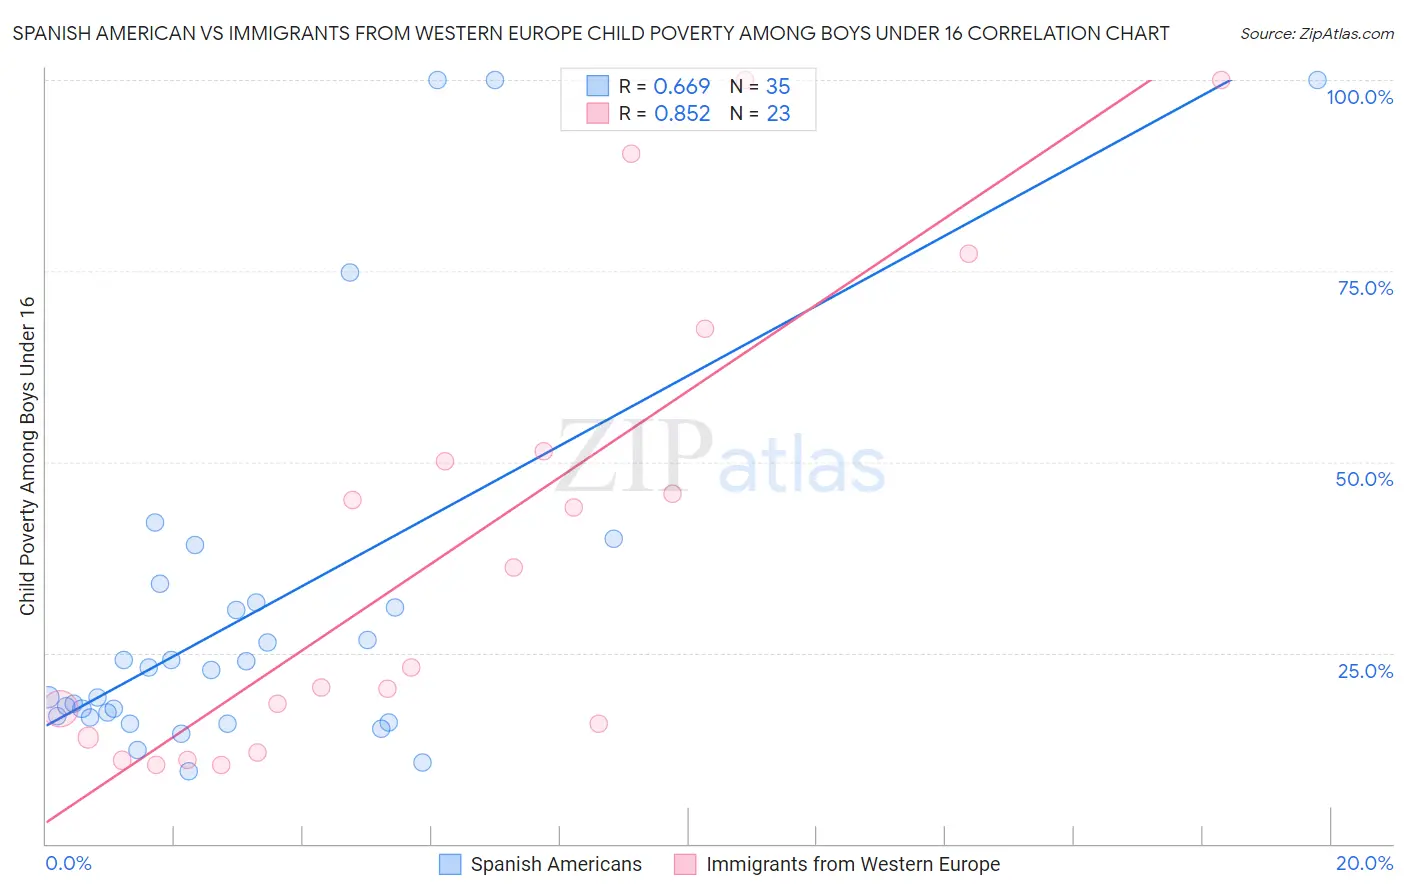 Spanish American vs Immigrants from Western Europe Child Poverty Among Boys Under 16